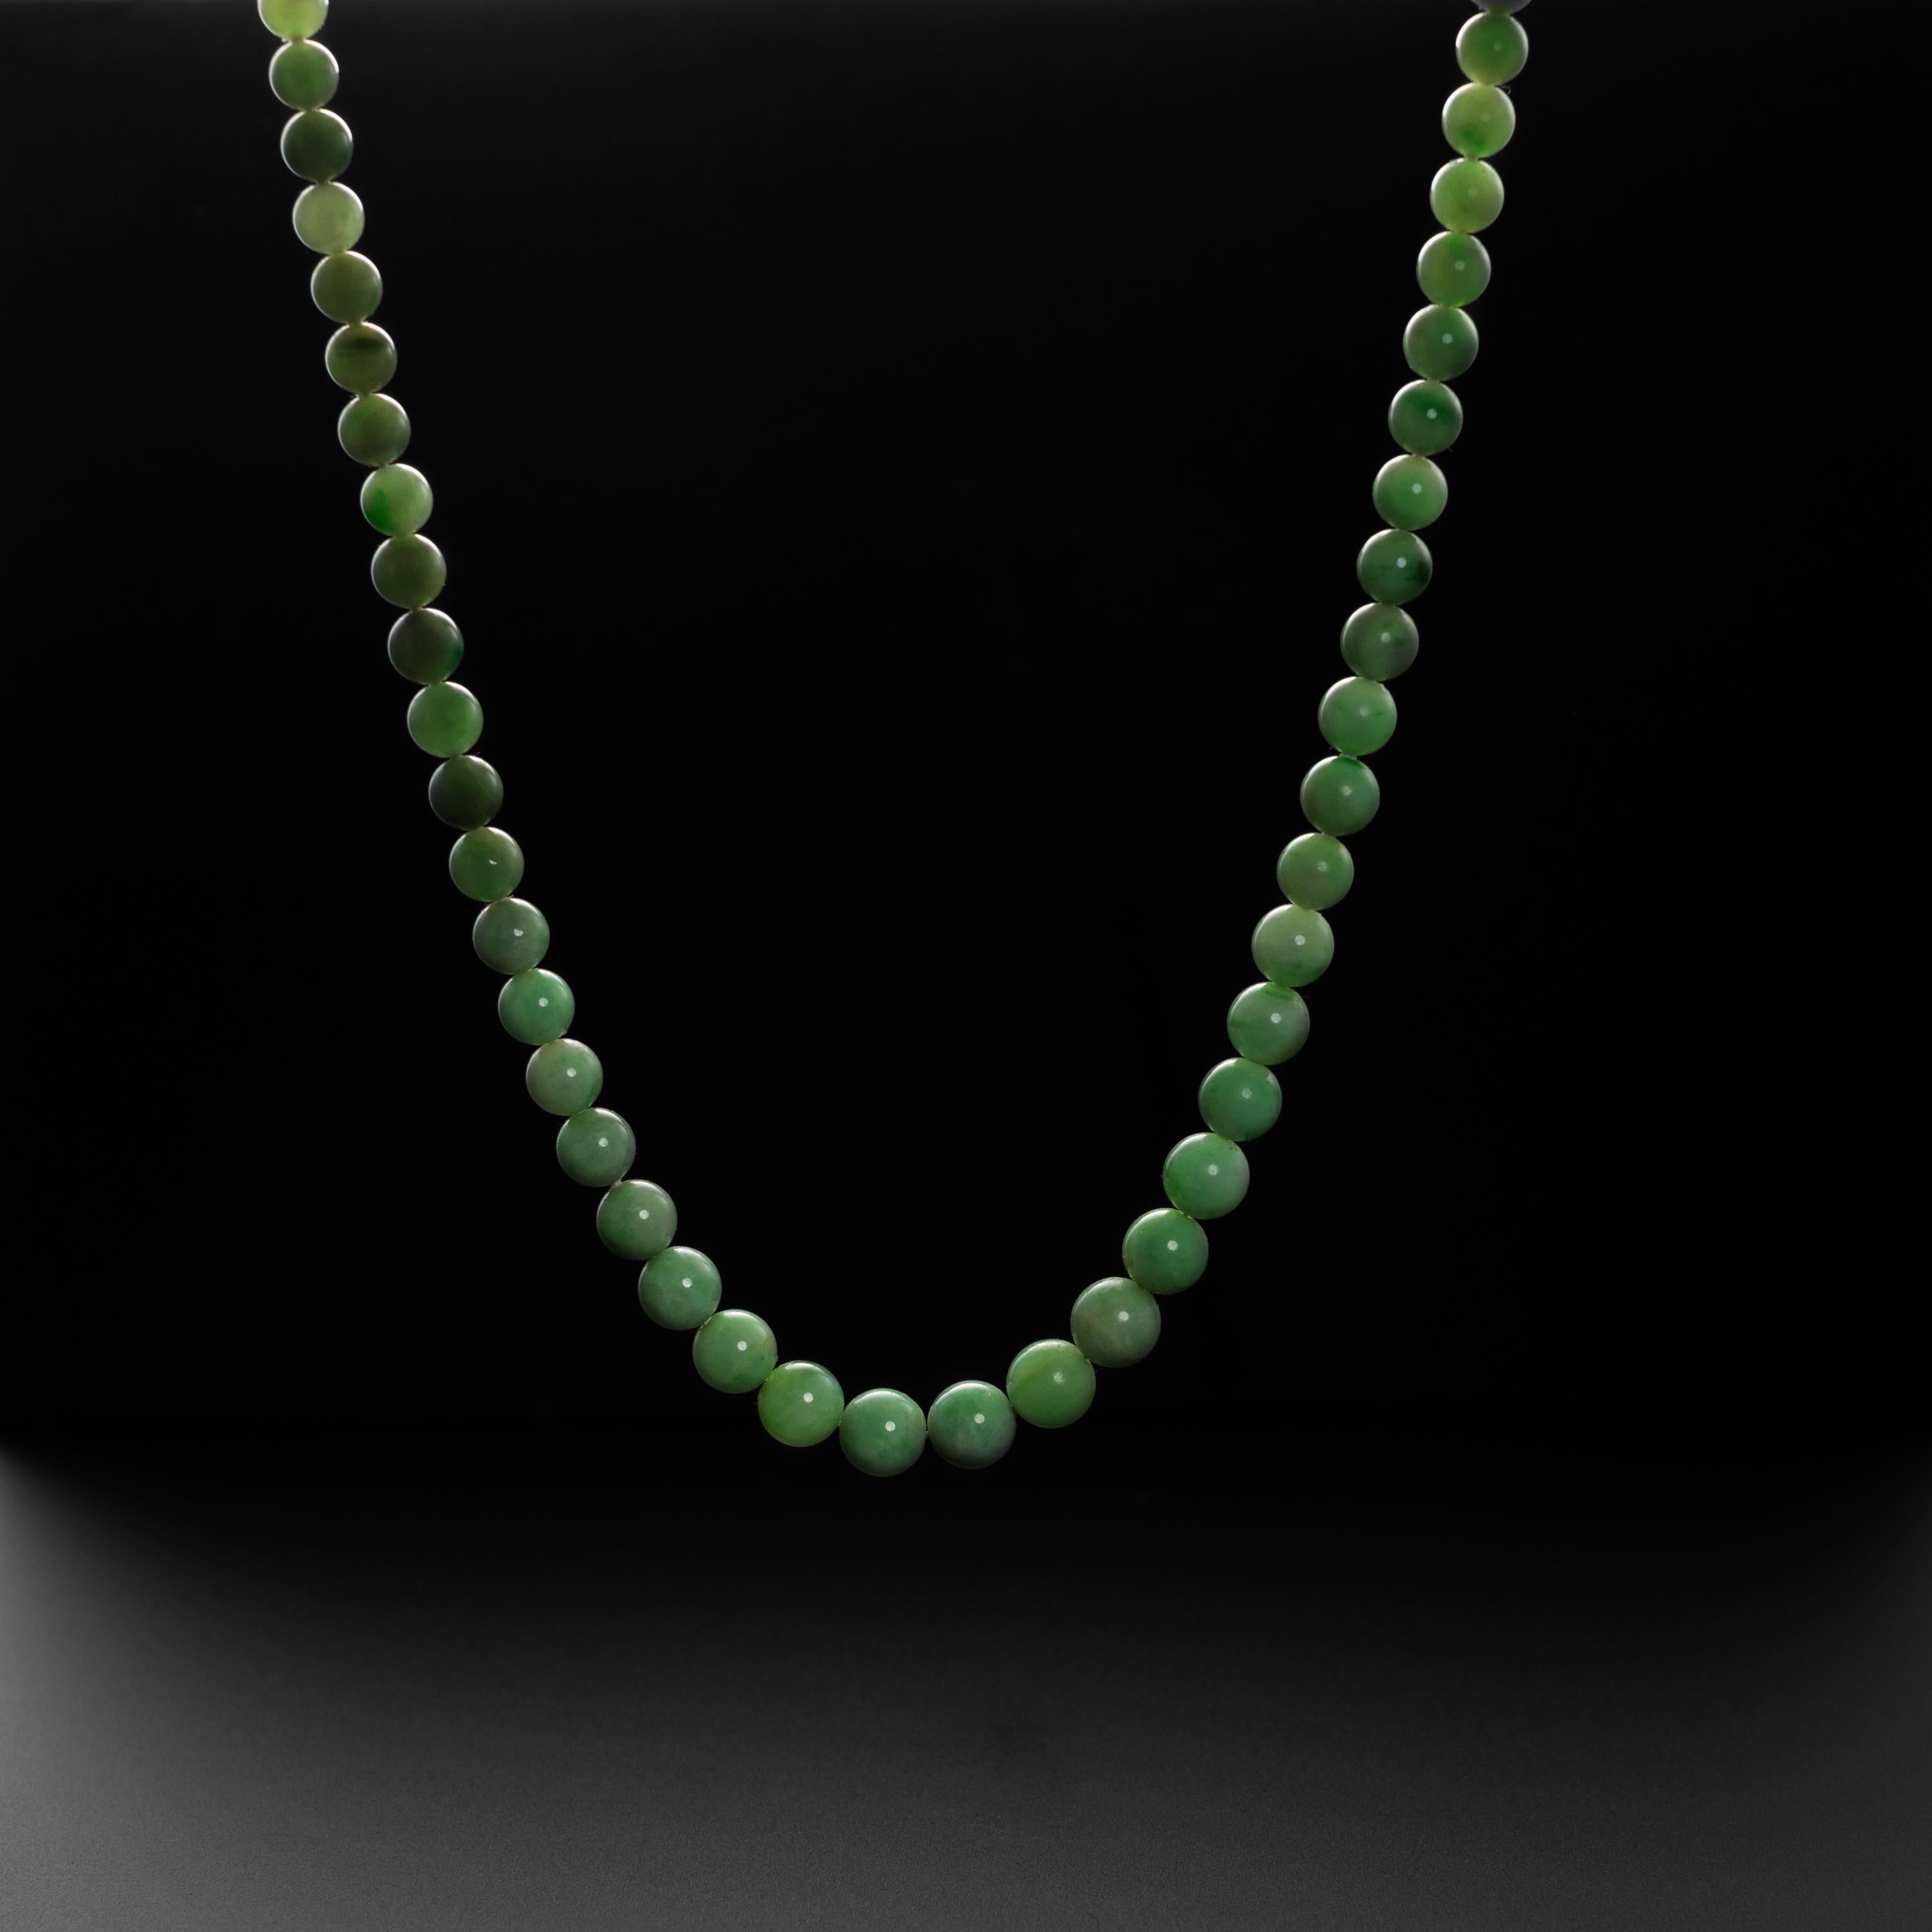 Bright Apple Green Jadeite Jade Necklace Certified Untreated For Sale ...